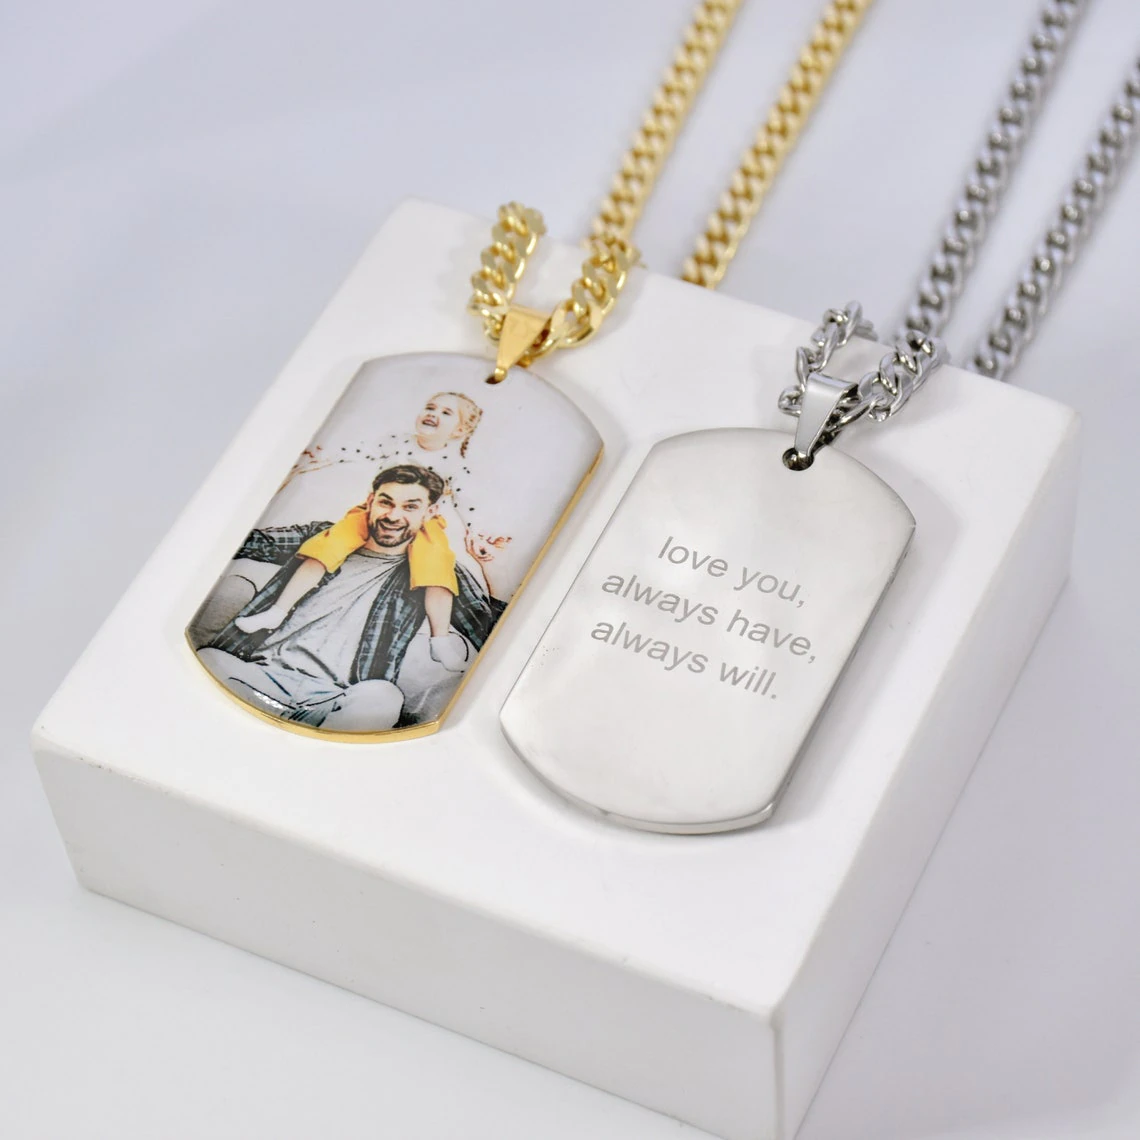 Custom Military Dog Tags, Embossed Text